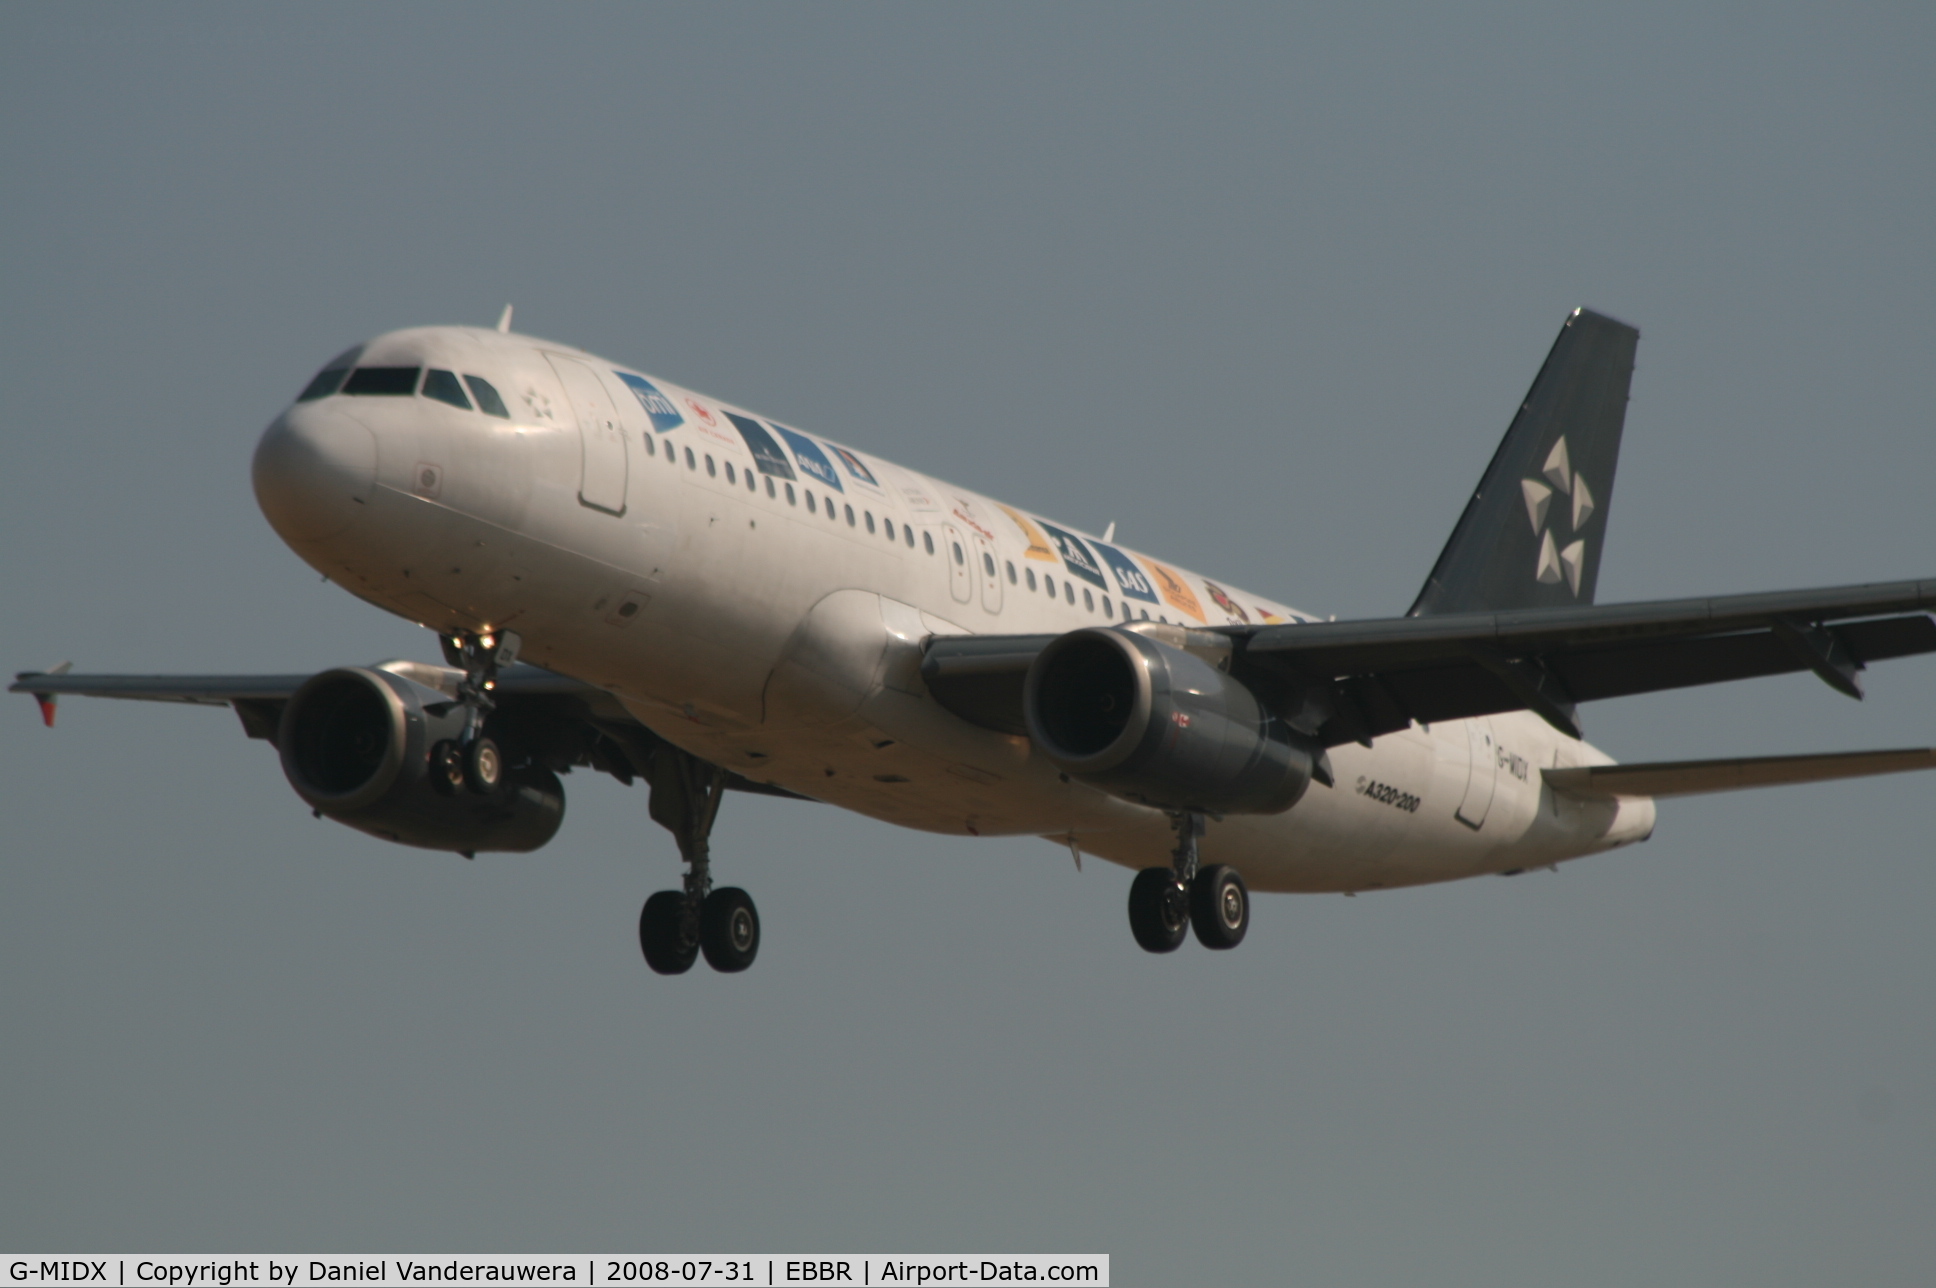 G-MIDX, 2000 Airbus A320-232 C/N 1177, arrival of flight BD145 to rwy 25L